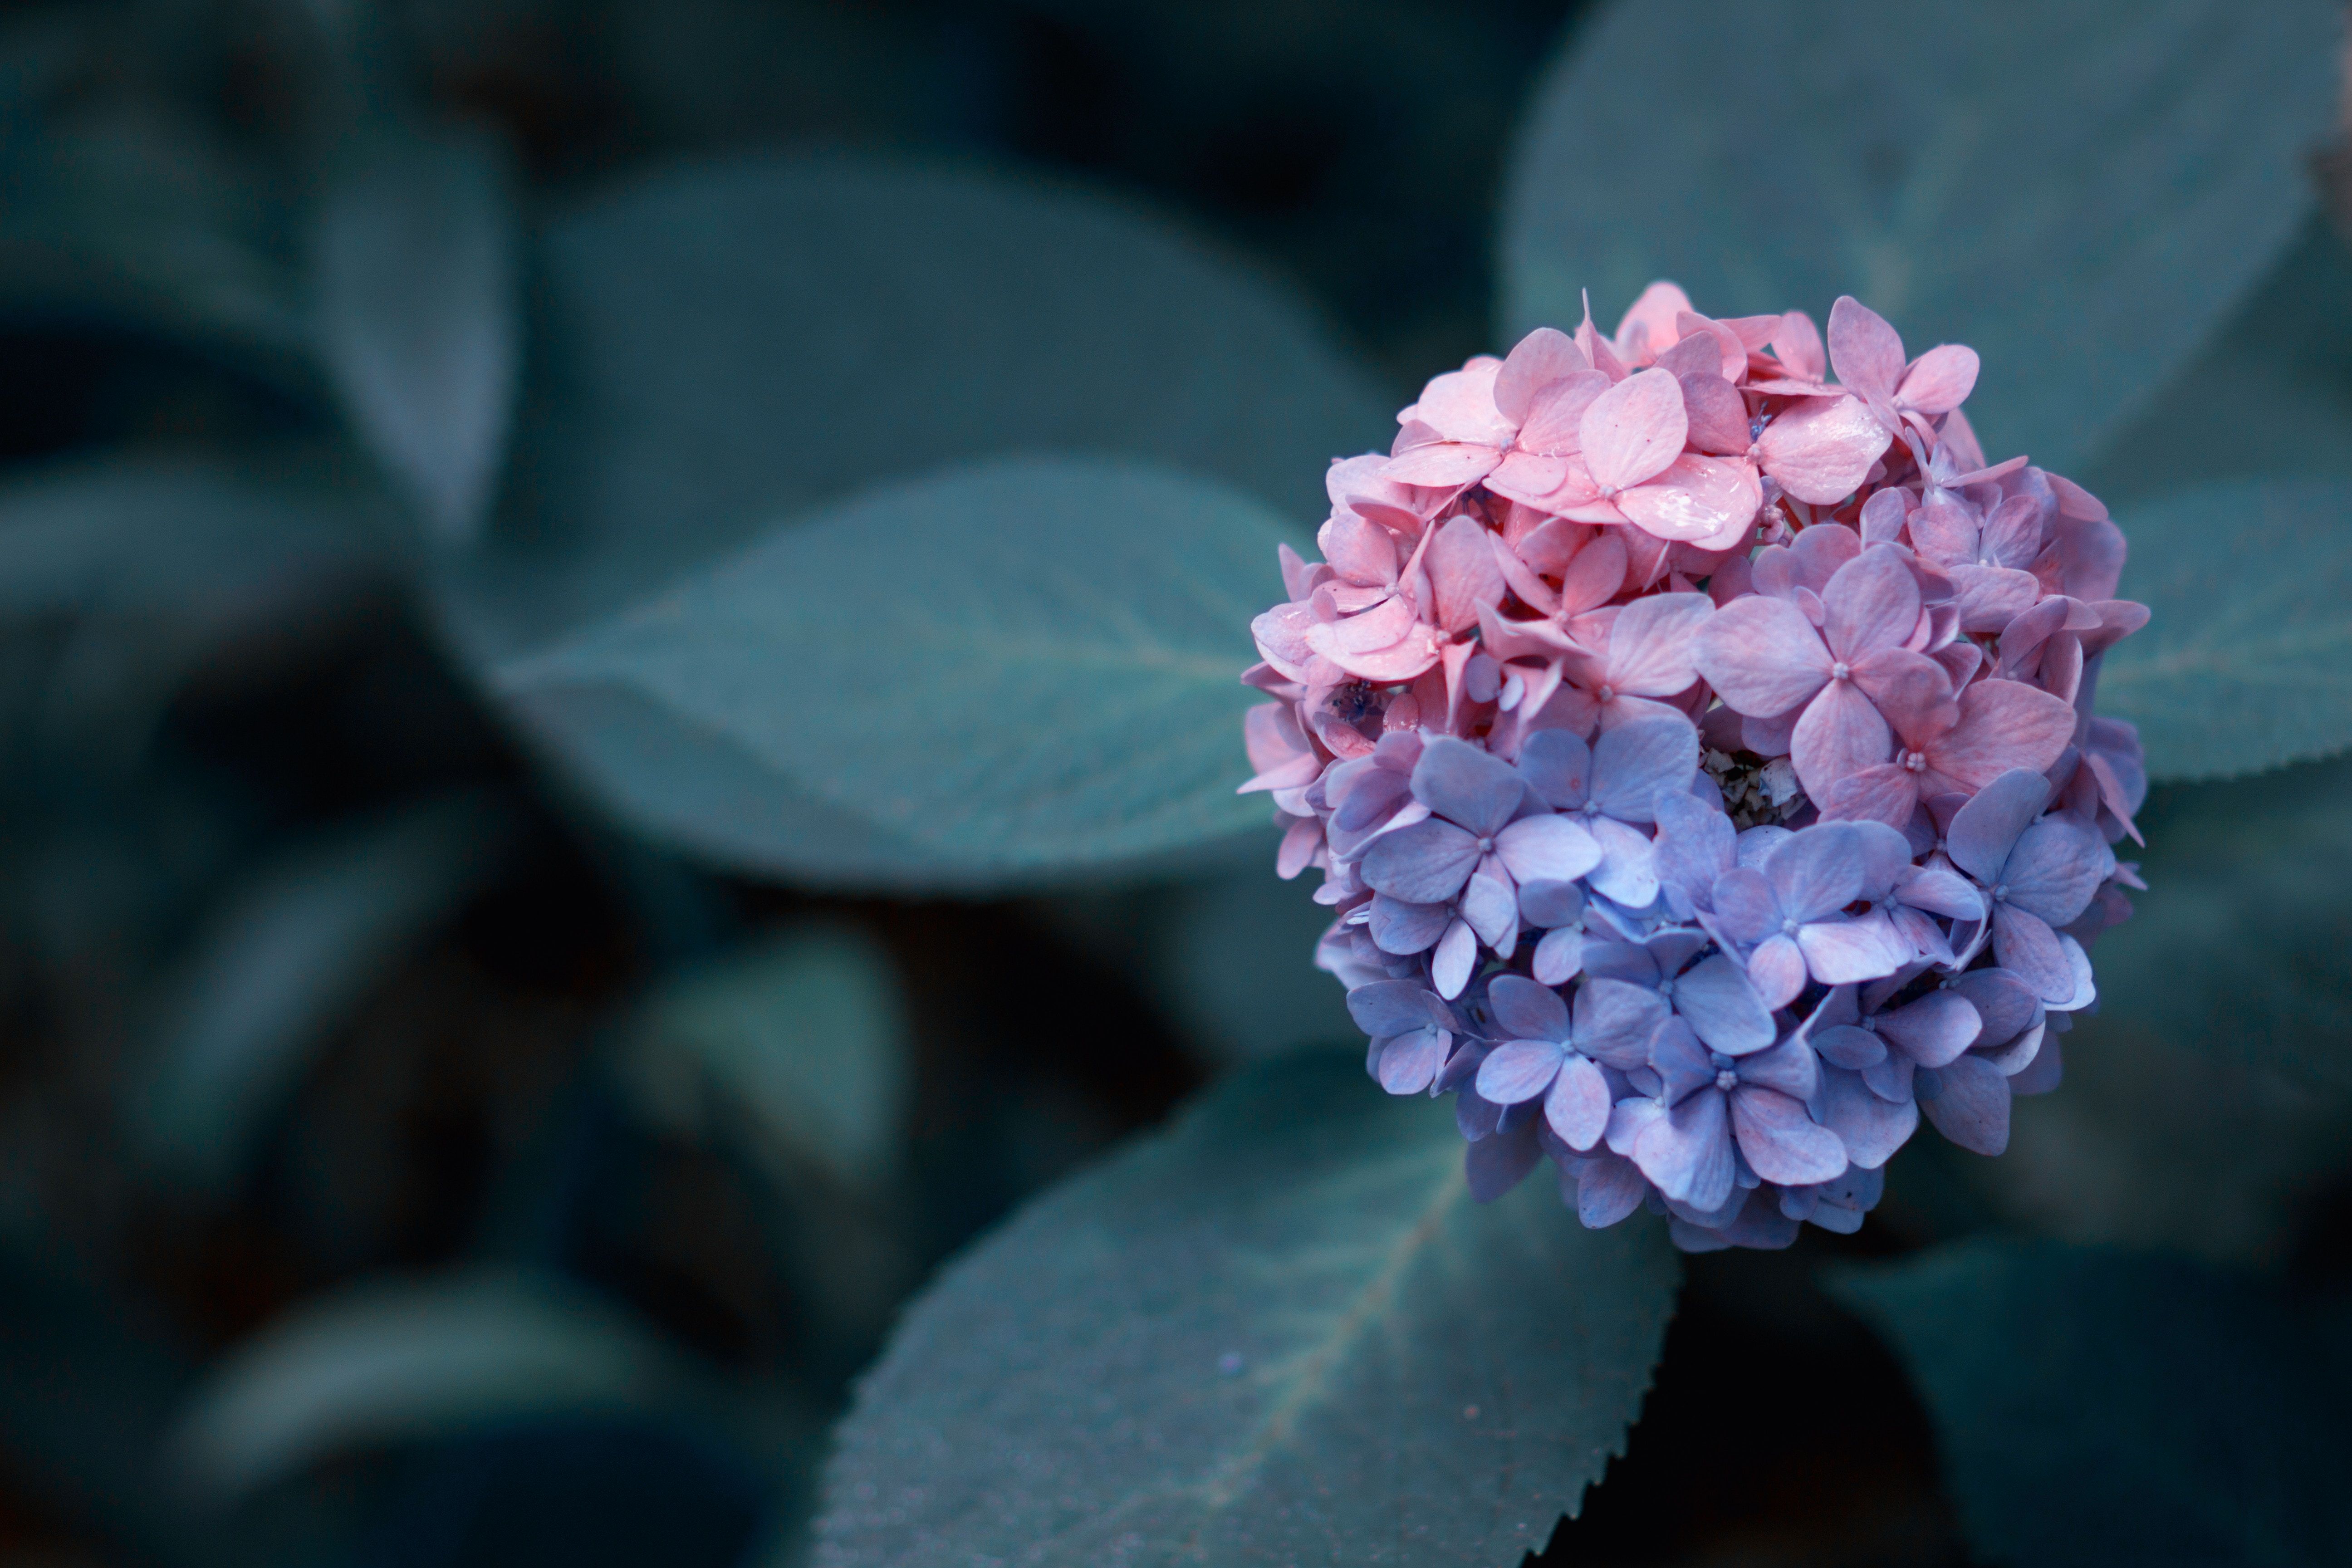 5184x3456 #flower, #garden, #flowering shrub, #water, #flower wallpaper, #flower background, #flora, #colorful, #plant, #nature, #color, #wallpaper, #mixed, #pink and purple hydrangea, #natural, #rain, #blossom, # floral background, #hydrangea